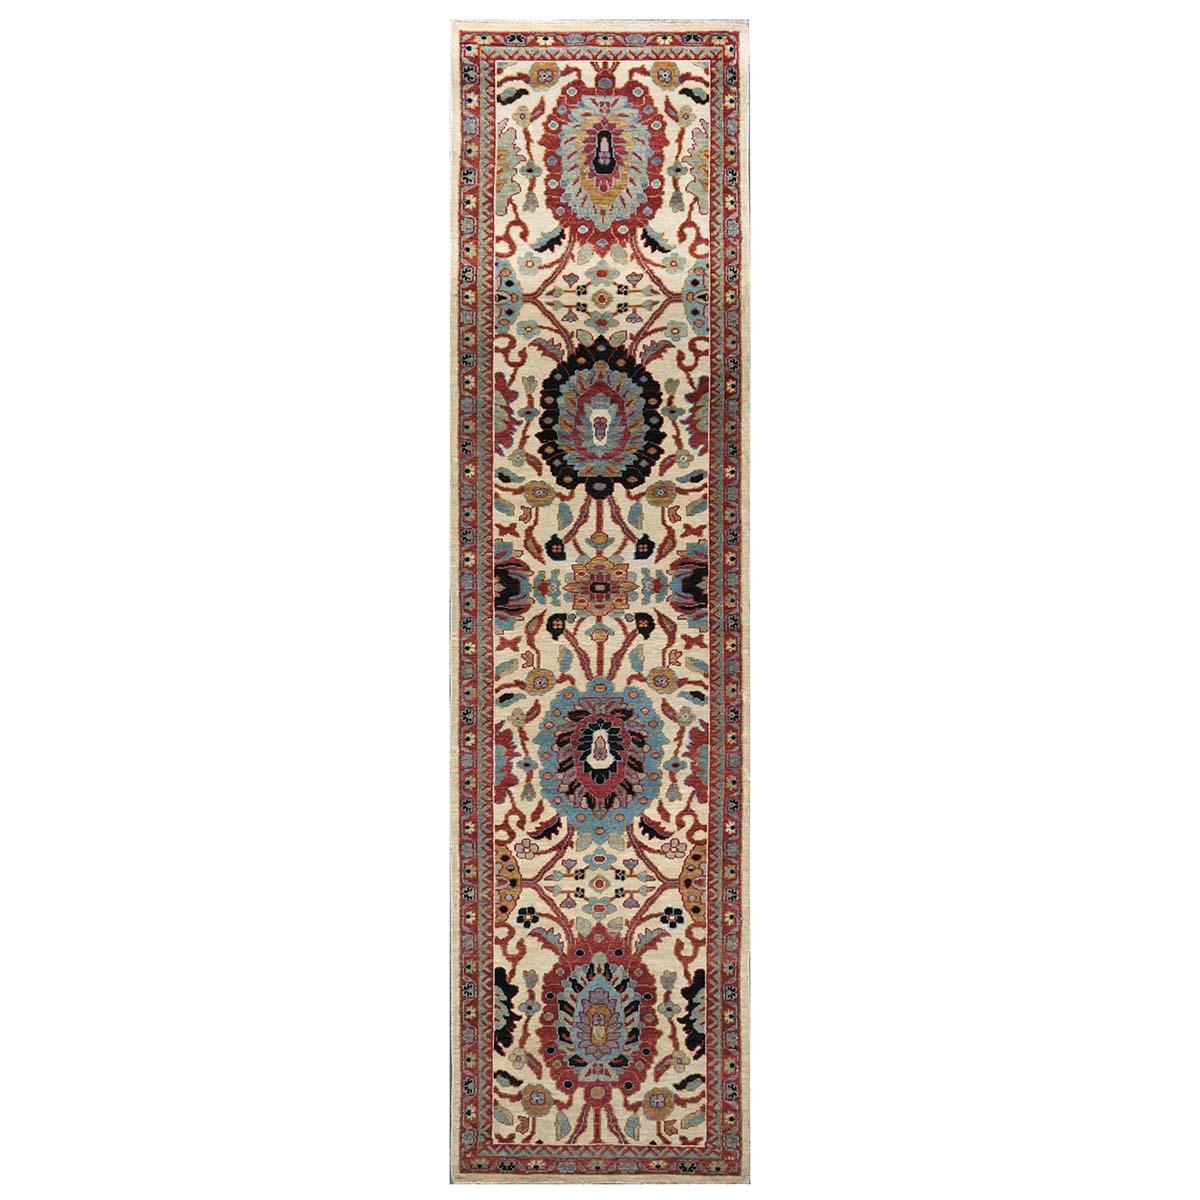 21st Century Sultanabad 3x12 Ivory, Red, & Blue Hall Runner Rug